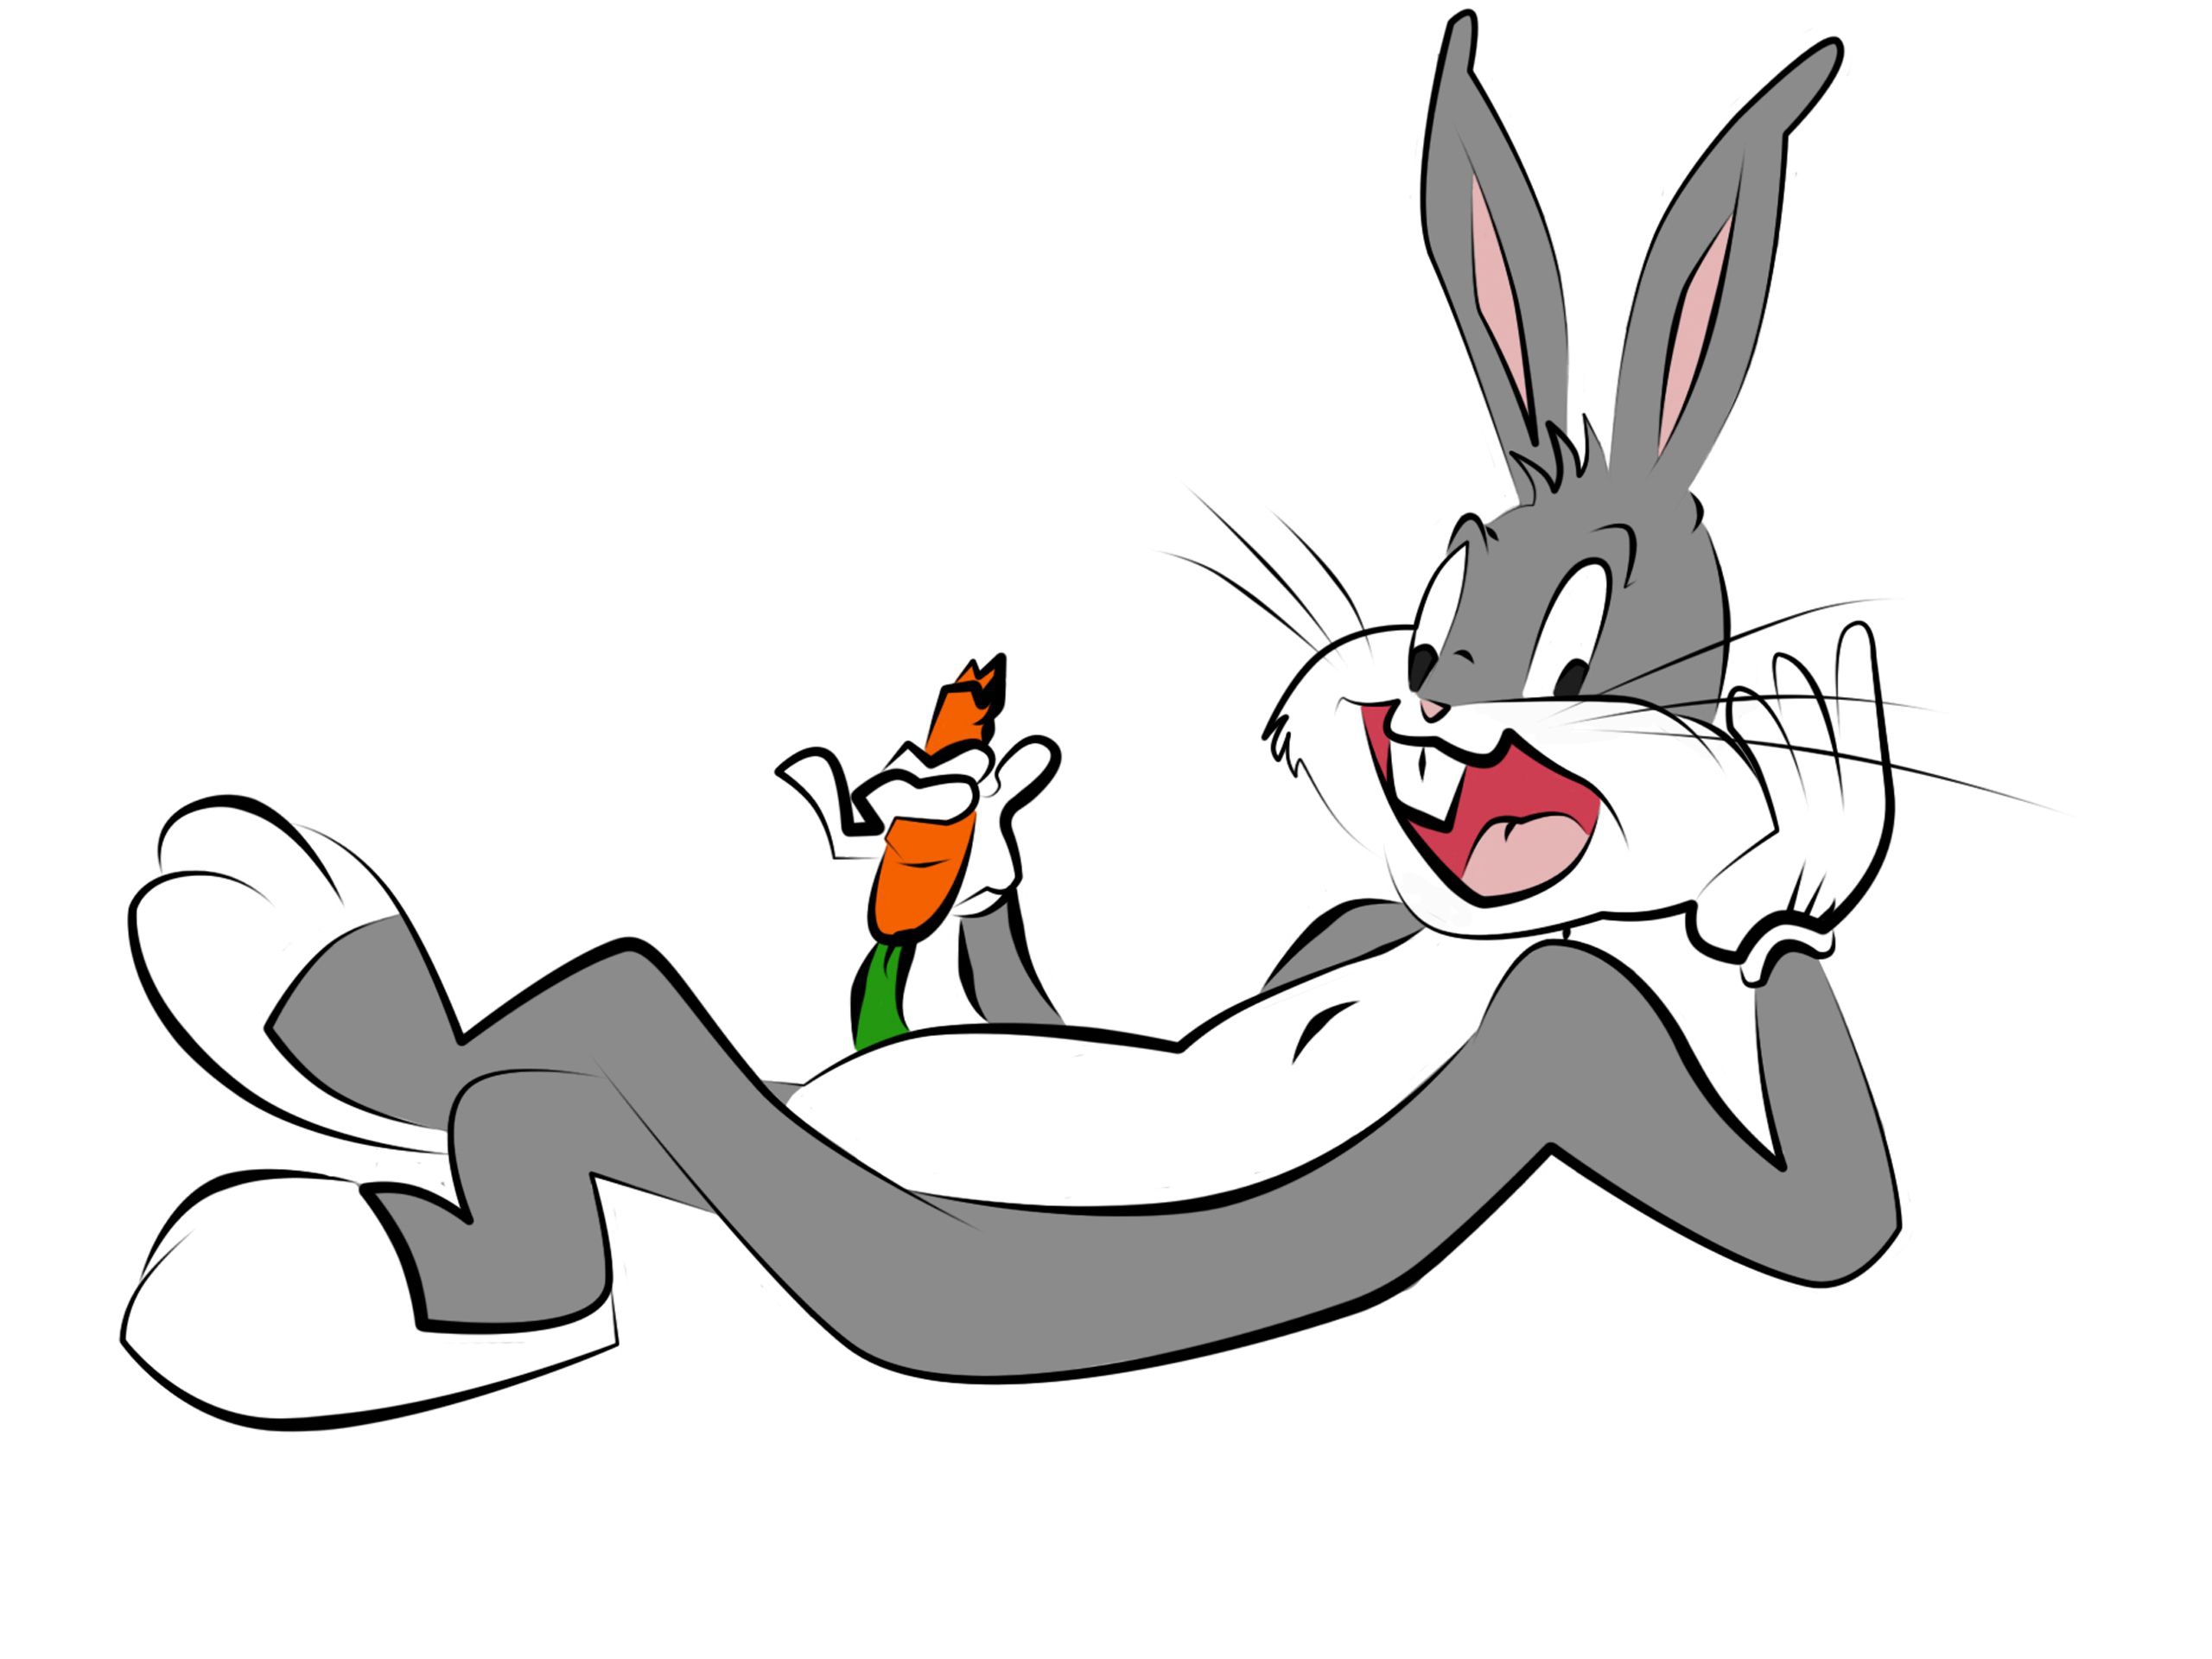 All Bugs Bunny wallpapers.